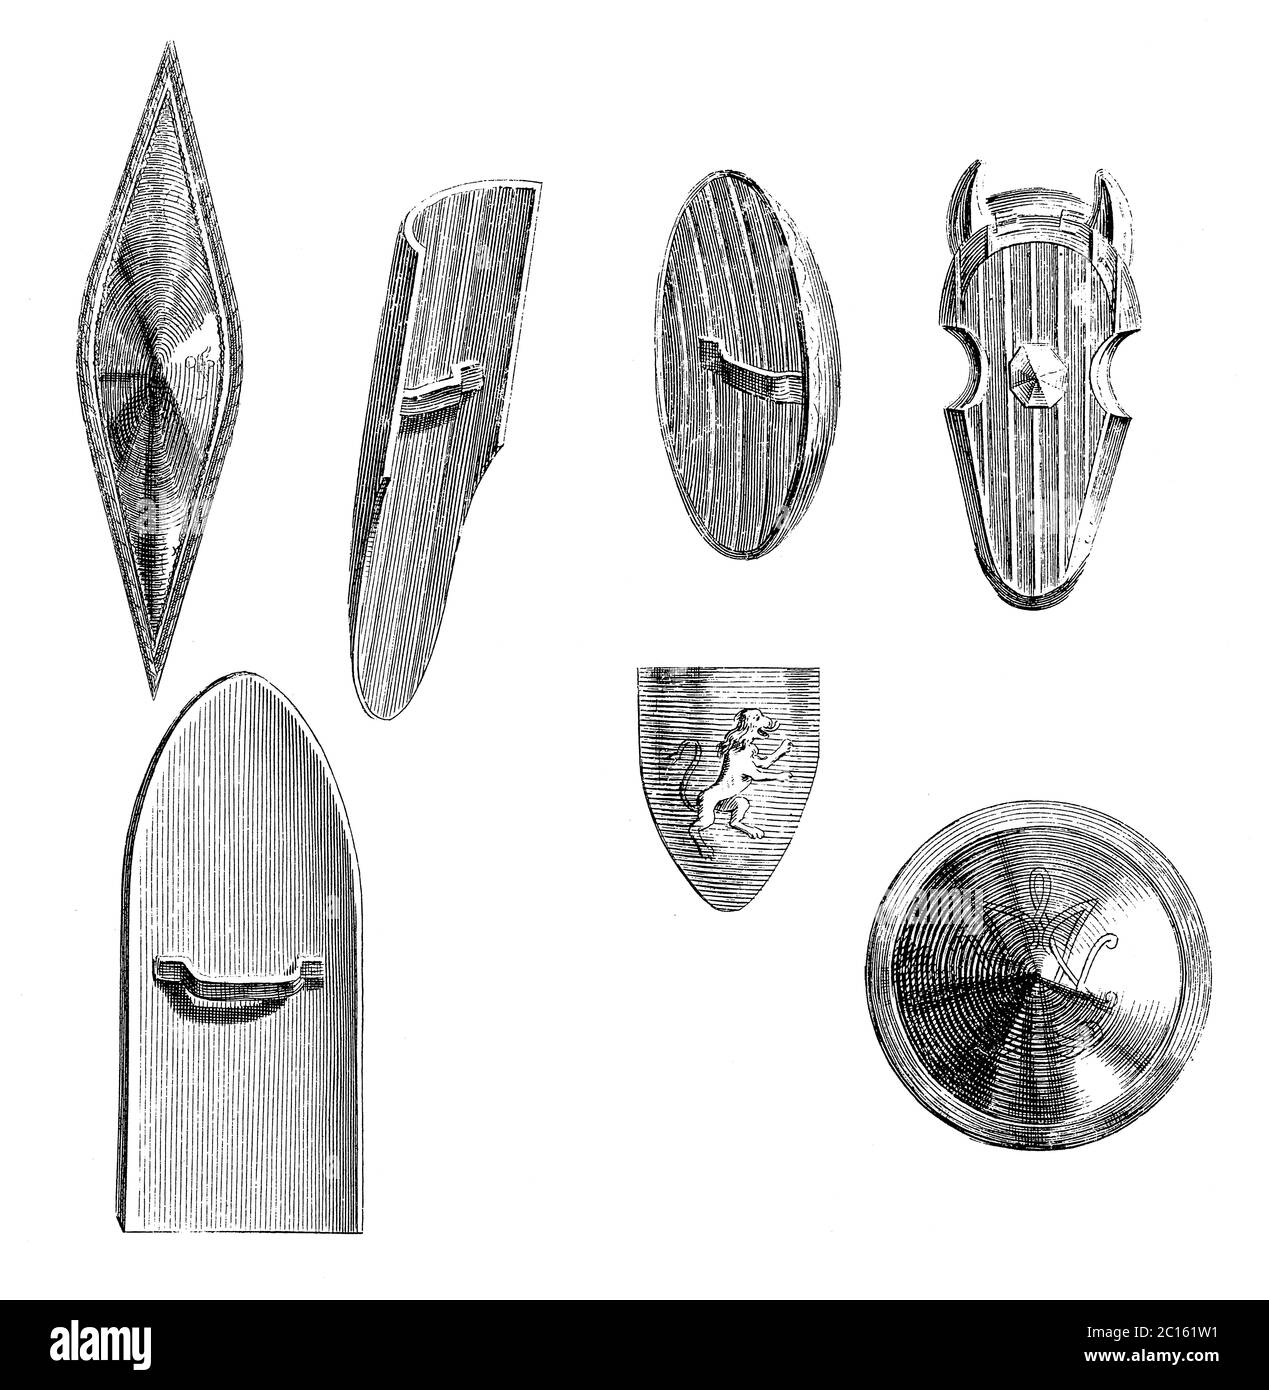 18th century illustration of various types of shields, horses' helmet and coat of arms. Published in 'A Diderot Pictorial Encyclopedia of Trades and I Stock Photo